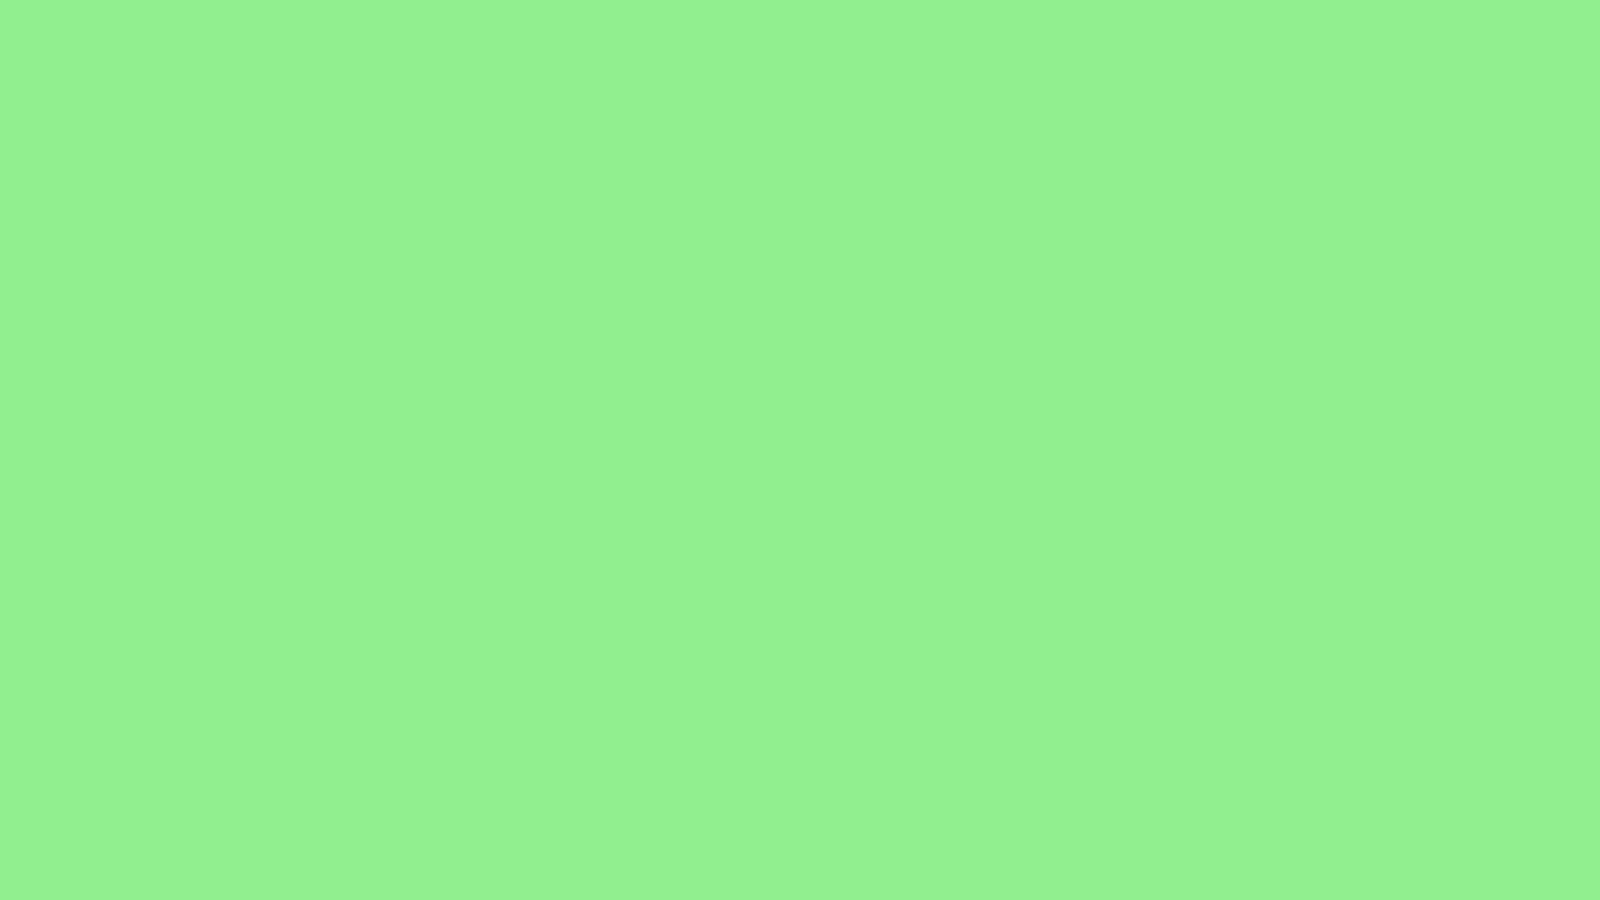 Gallery for - green color background wallpaper